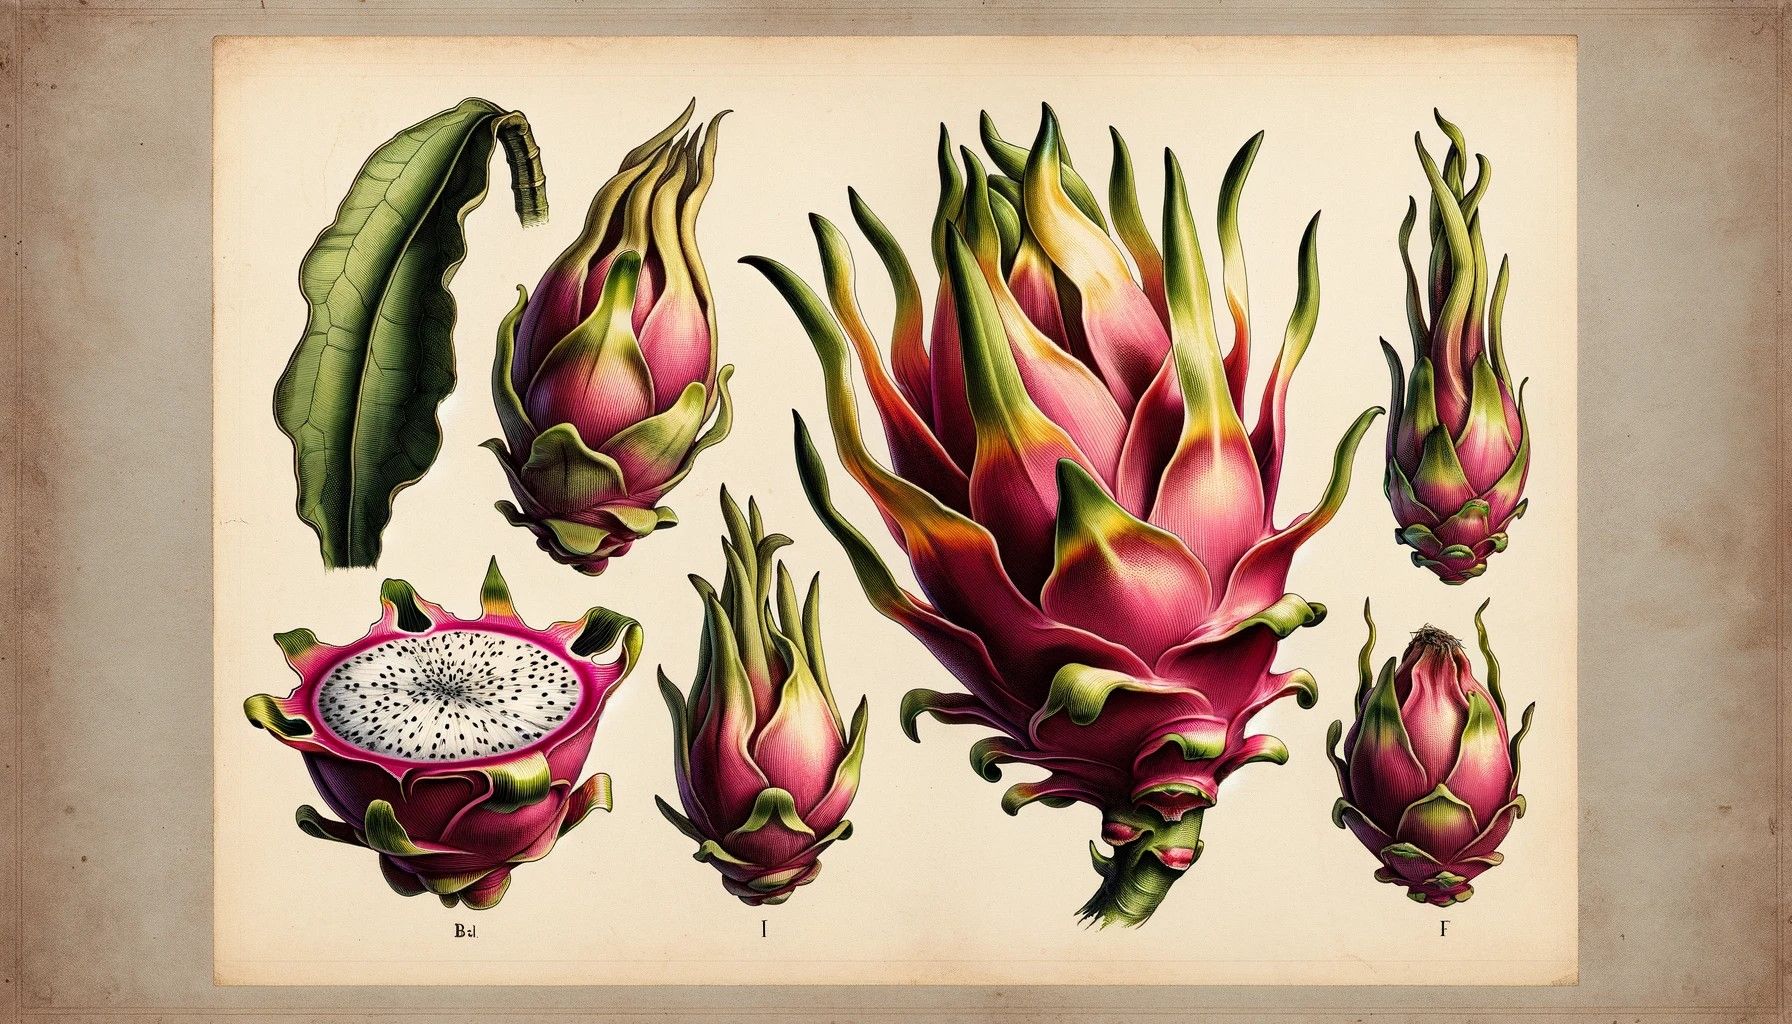 Image of a dragon fruit in the style of 19th-century scientific botanical drawings